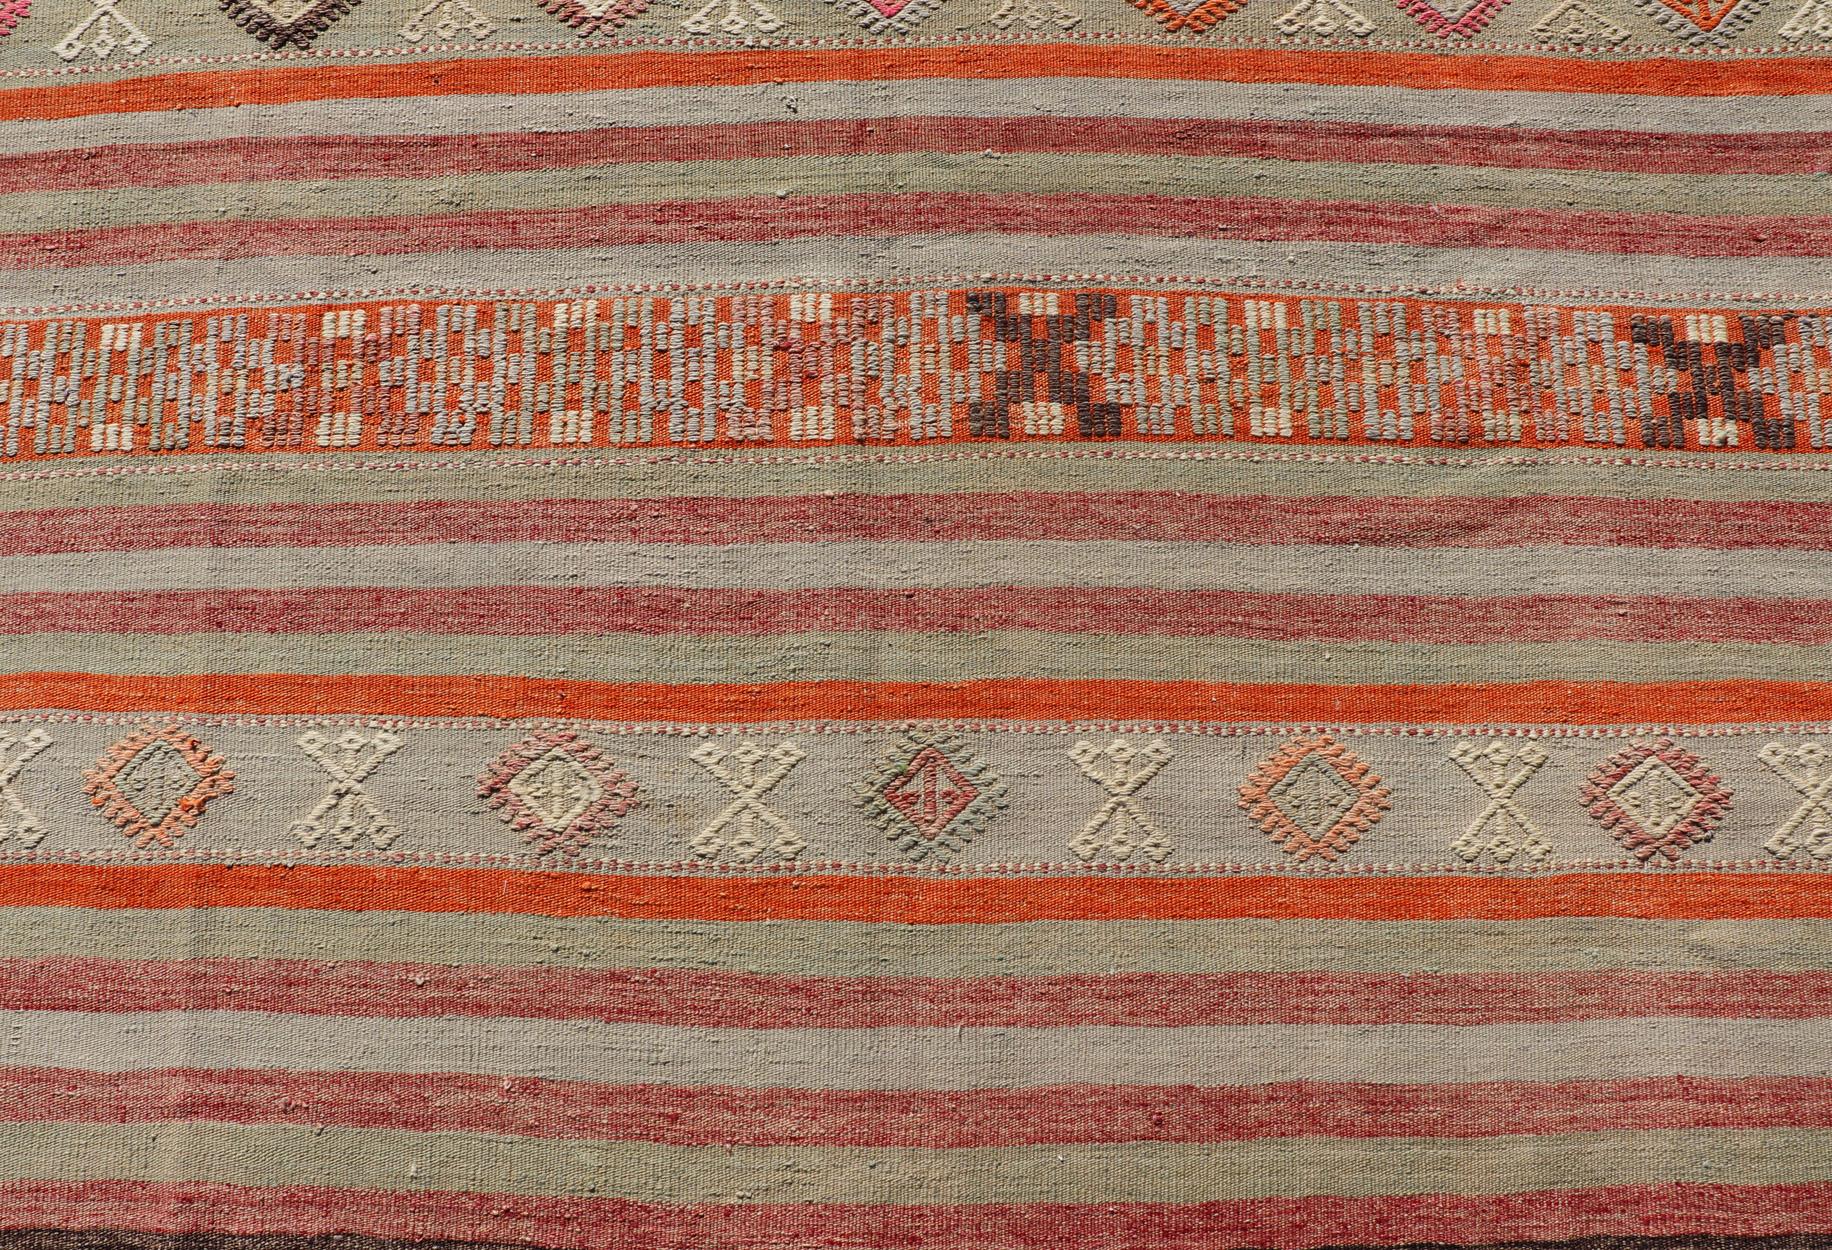 20th Century Vintage Turkish Kilim with Colorful Stripes in Orange, Lt. green, red & gray  For Sale